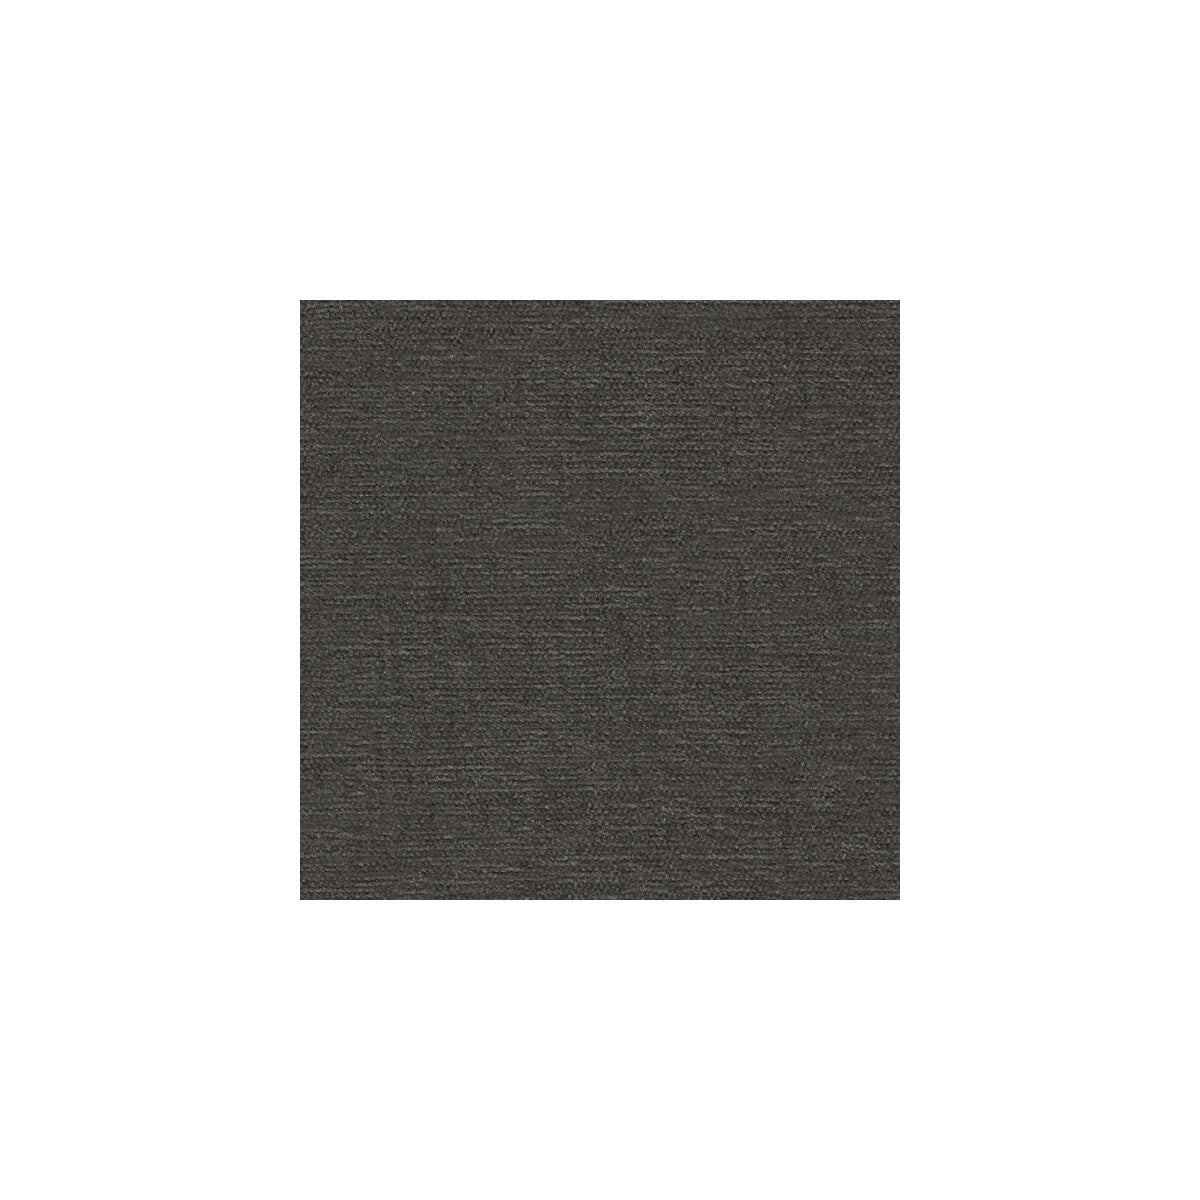 Stanton Chenille fabric in steel color - pattern 32148.811.0 - by Kravet Contract